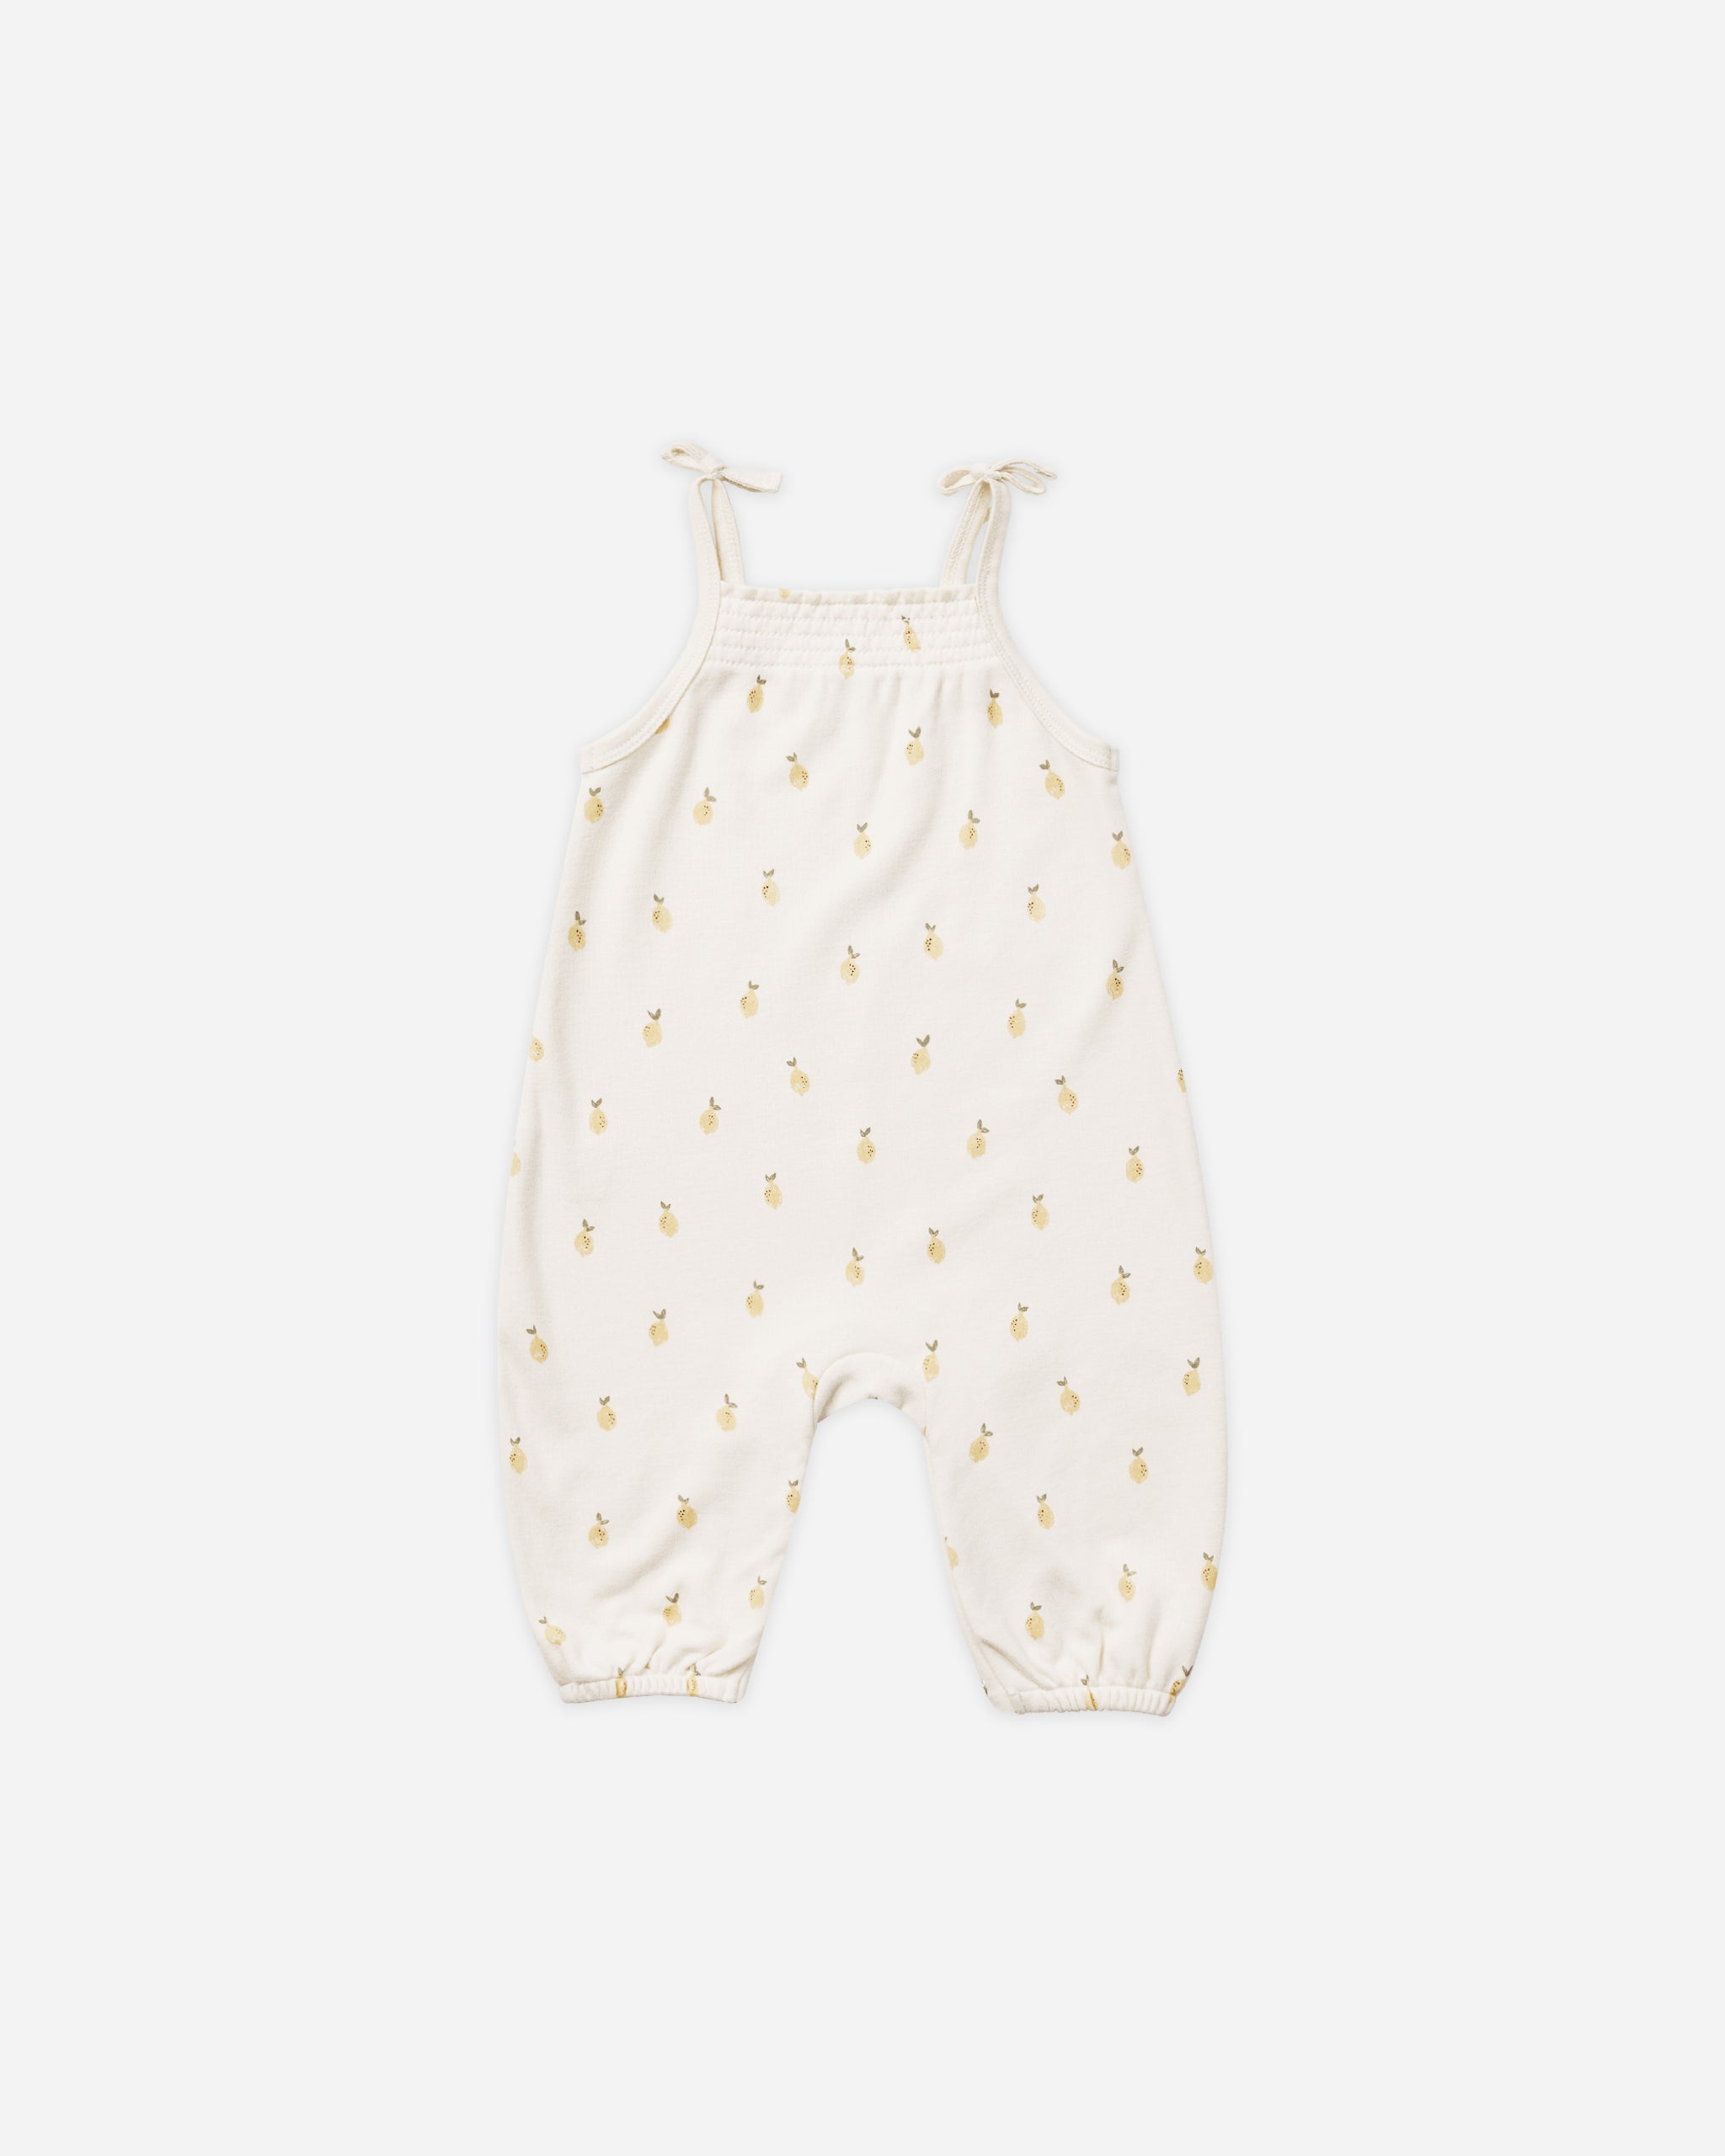 Smocked Jumpsuit || Lemons - Rylee + Cru | Kids Clothes | Trendy Baby Clothes | Modern Infant Outfits |